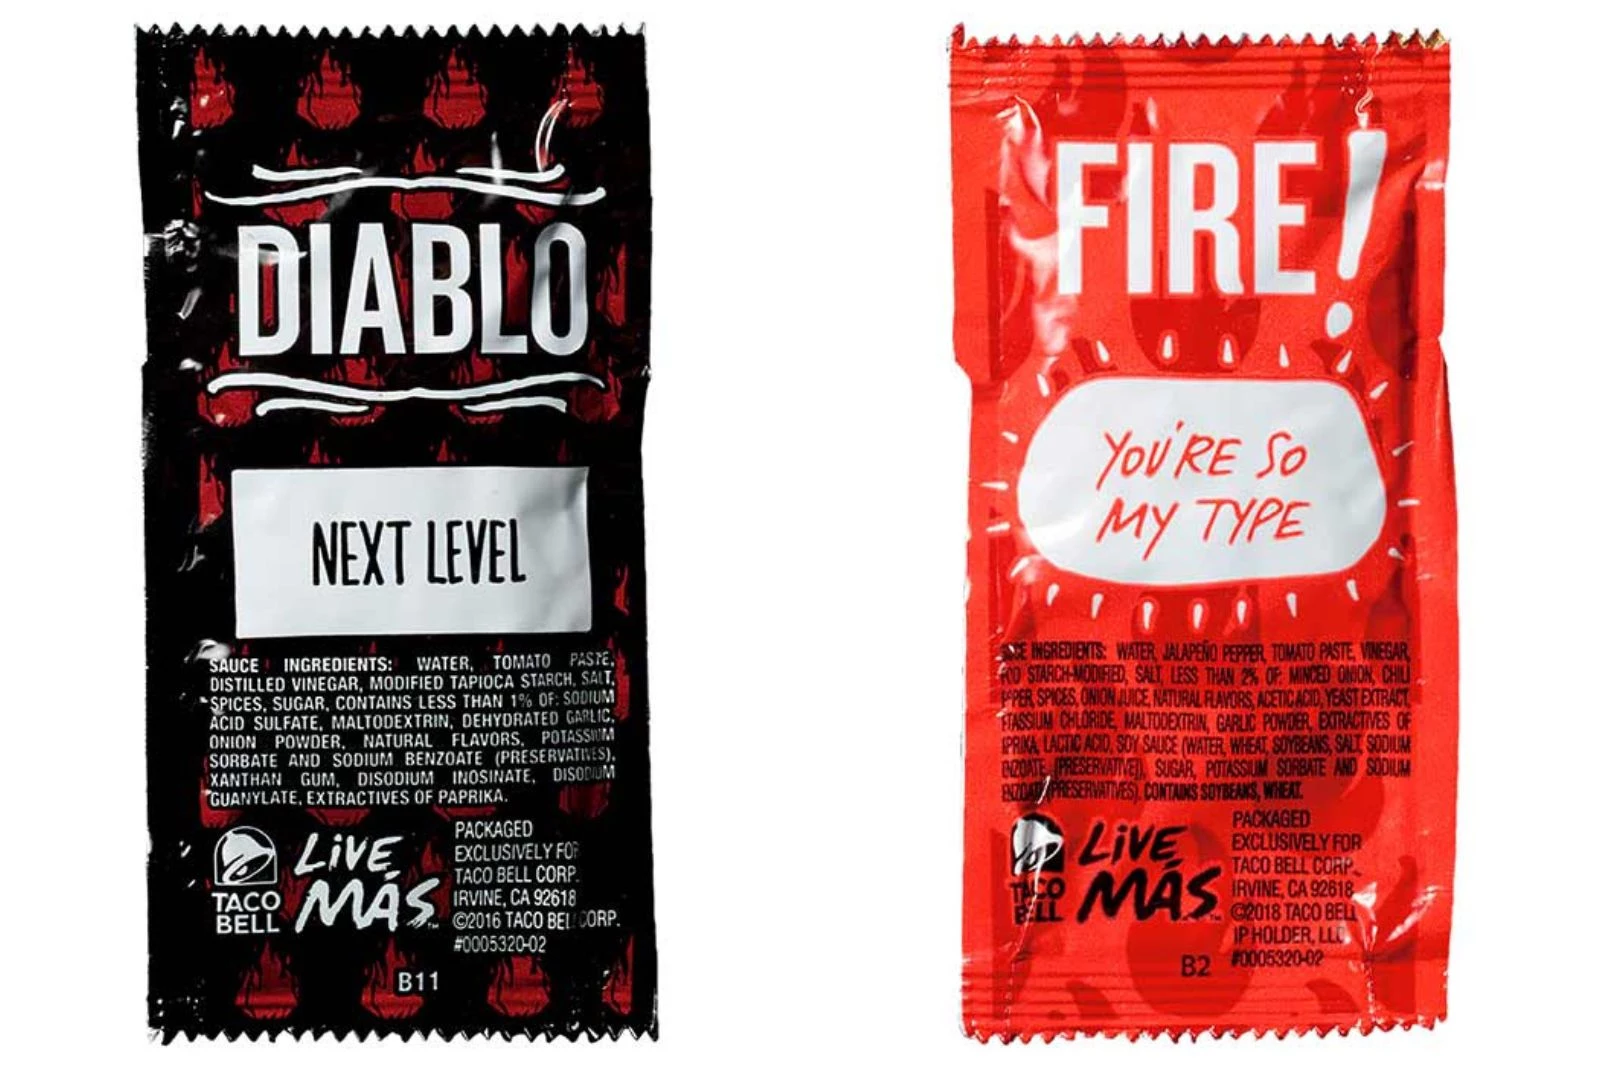 Sauce Packet Keychain – Del Taco Webstore